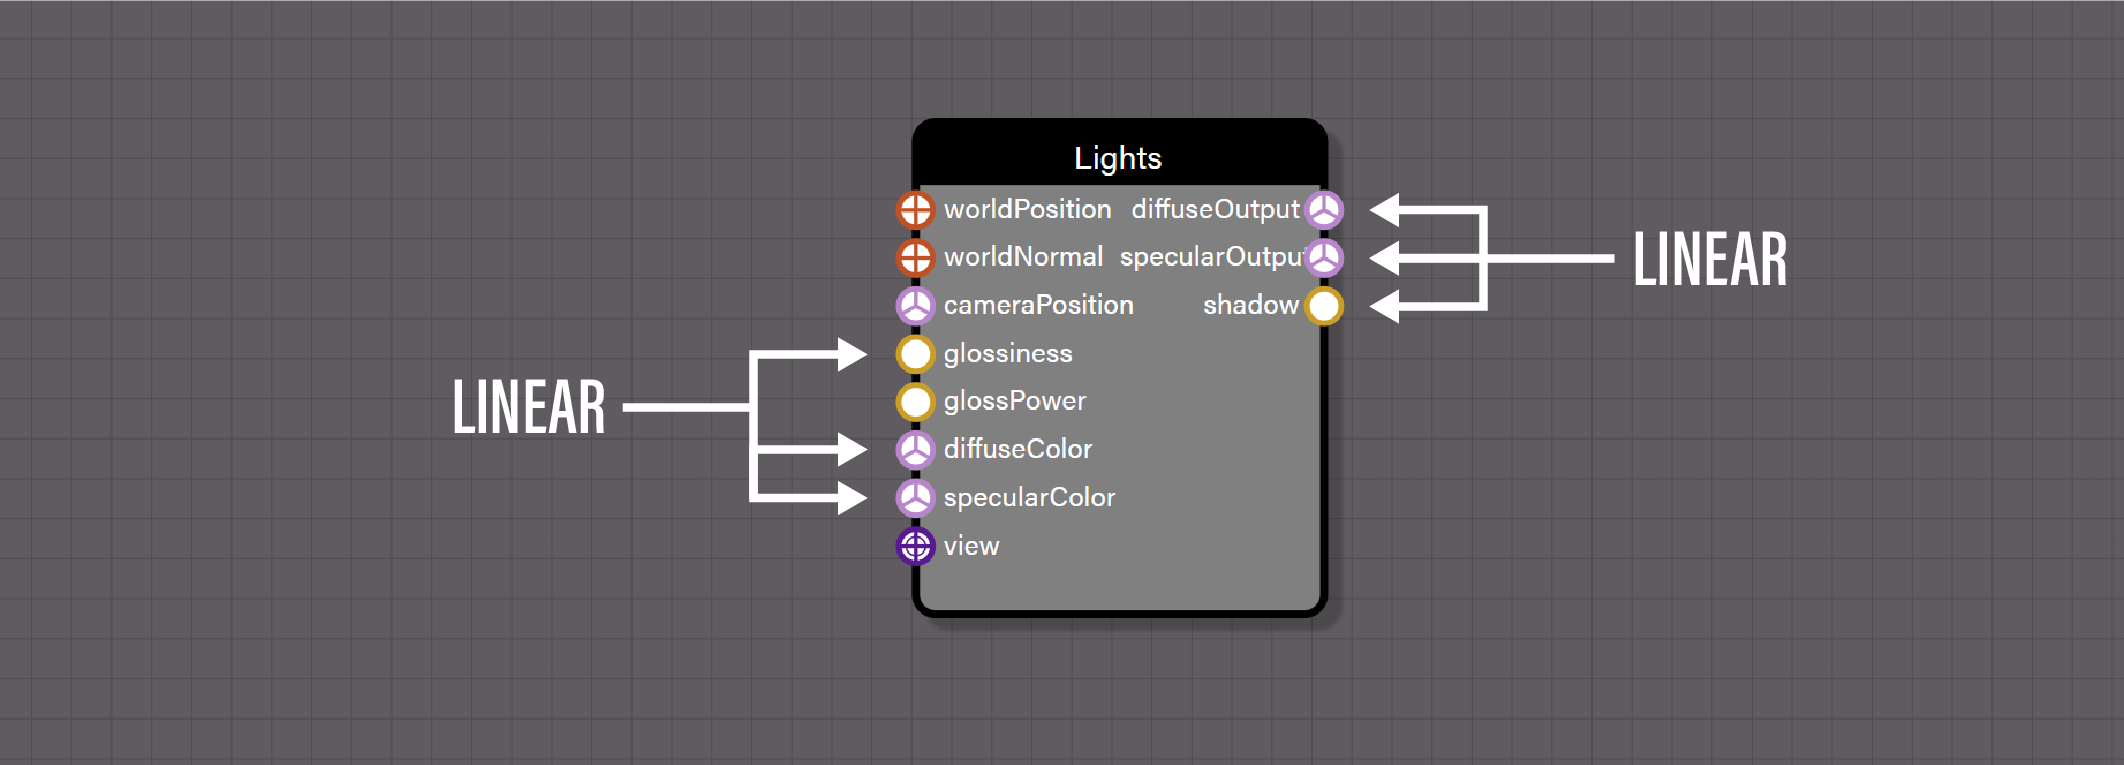 The lights node does no color space conversion, so we need to ensure all of our inputs are in linear color space when connected to this node